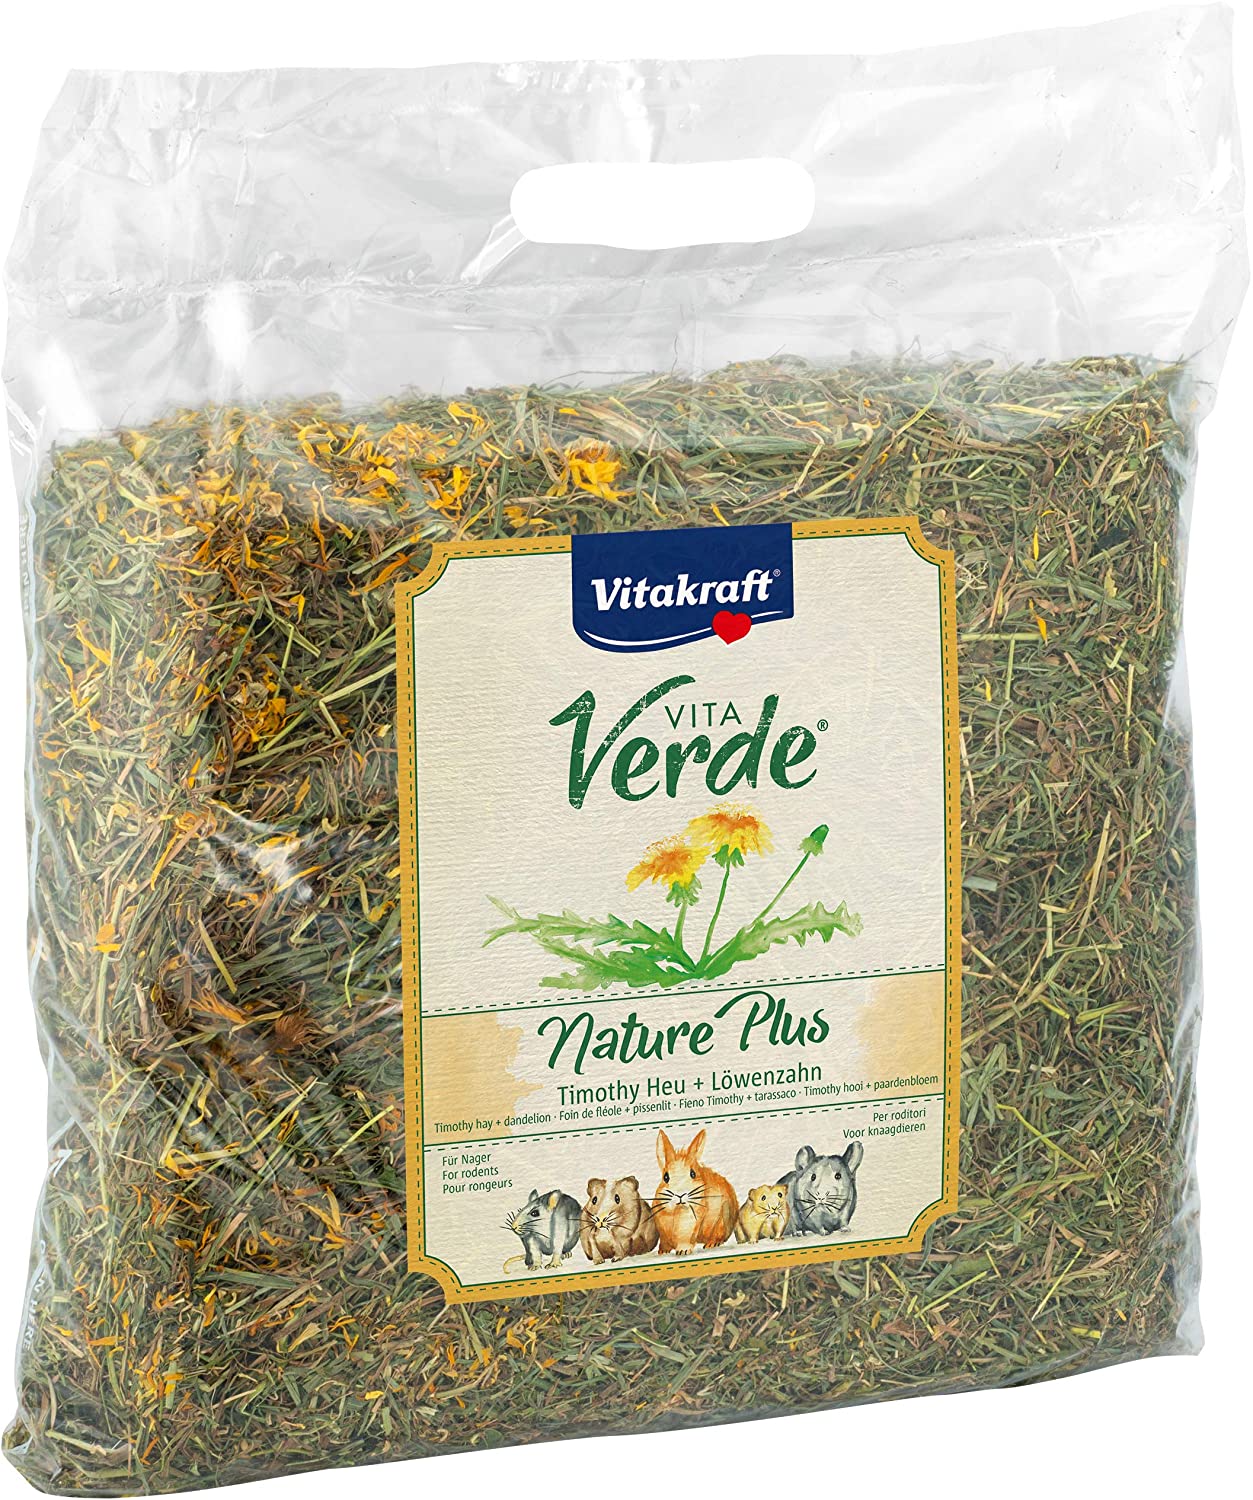 Vitakraft Vita Verde, Nature Plus - Timothy Hay + Dandelion, 500g ***** CURRENTLY OUT OF STOCK *****